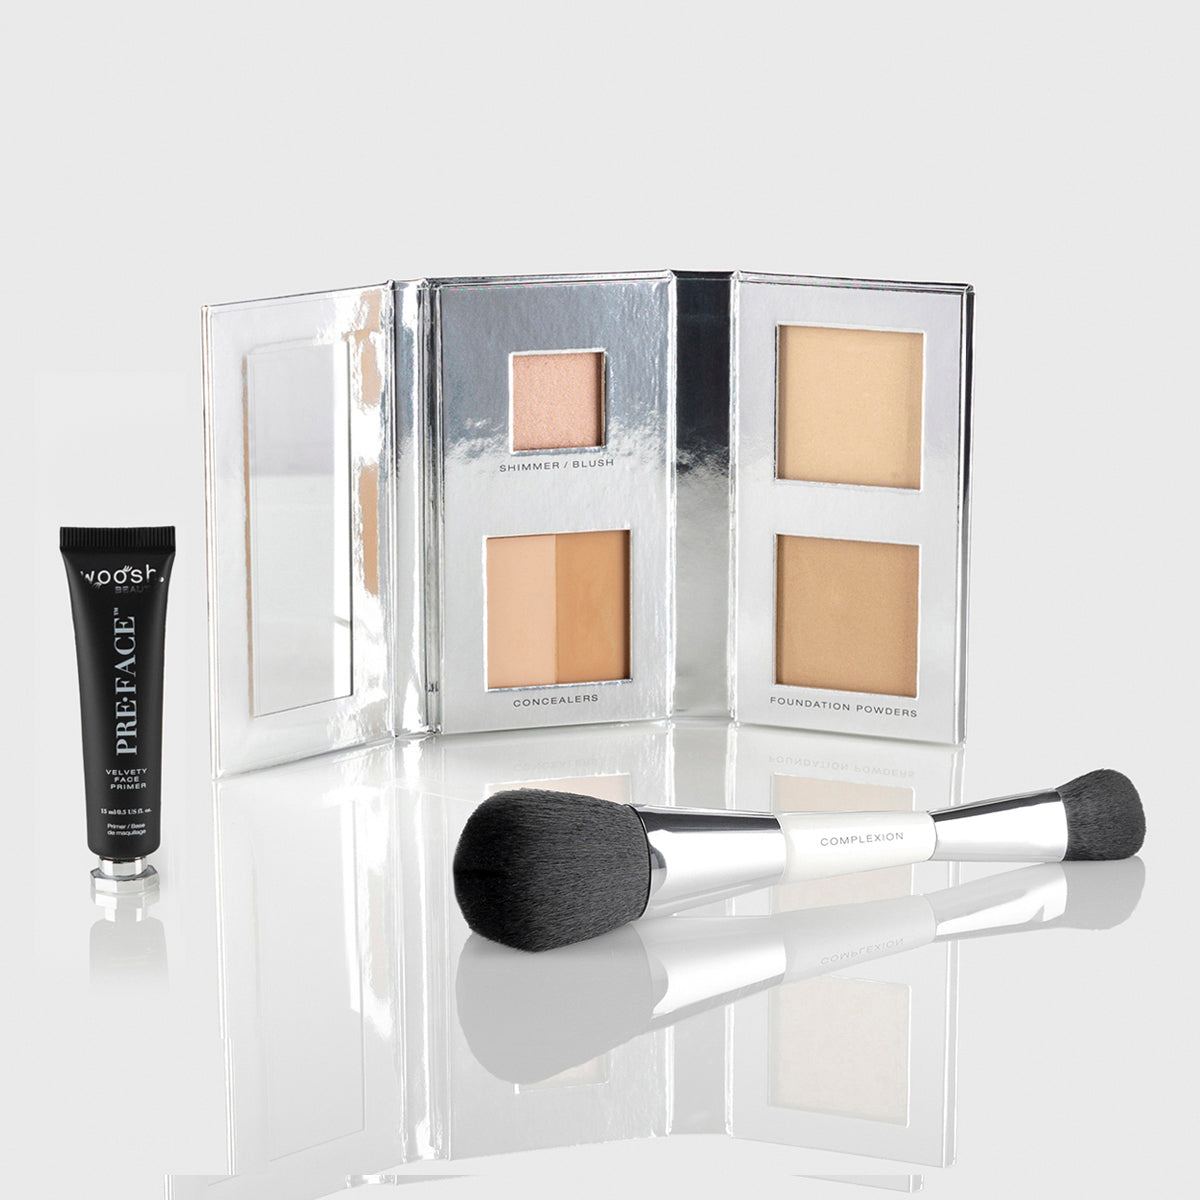 The Complexion Kit